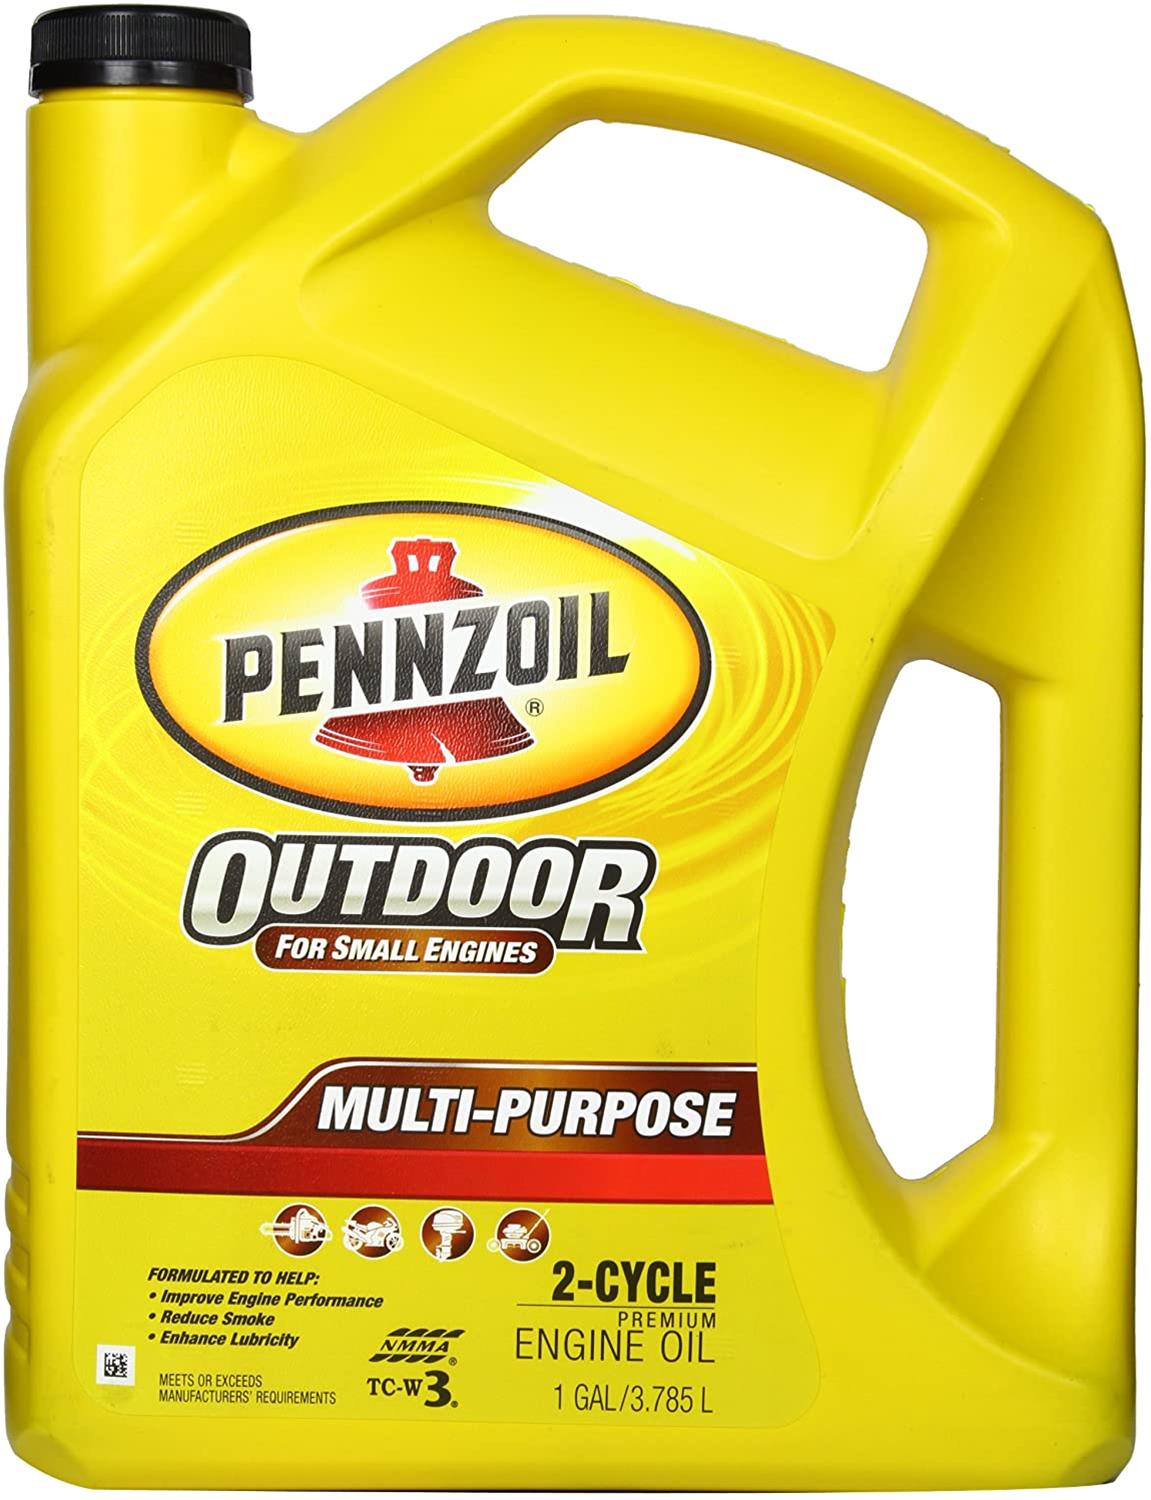 pennzoil-550045232-pennzoil-premium-outboard-and-multi-purpose-2-cycle